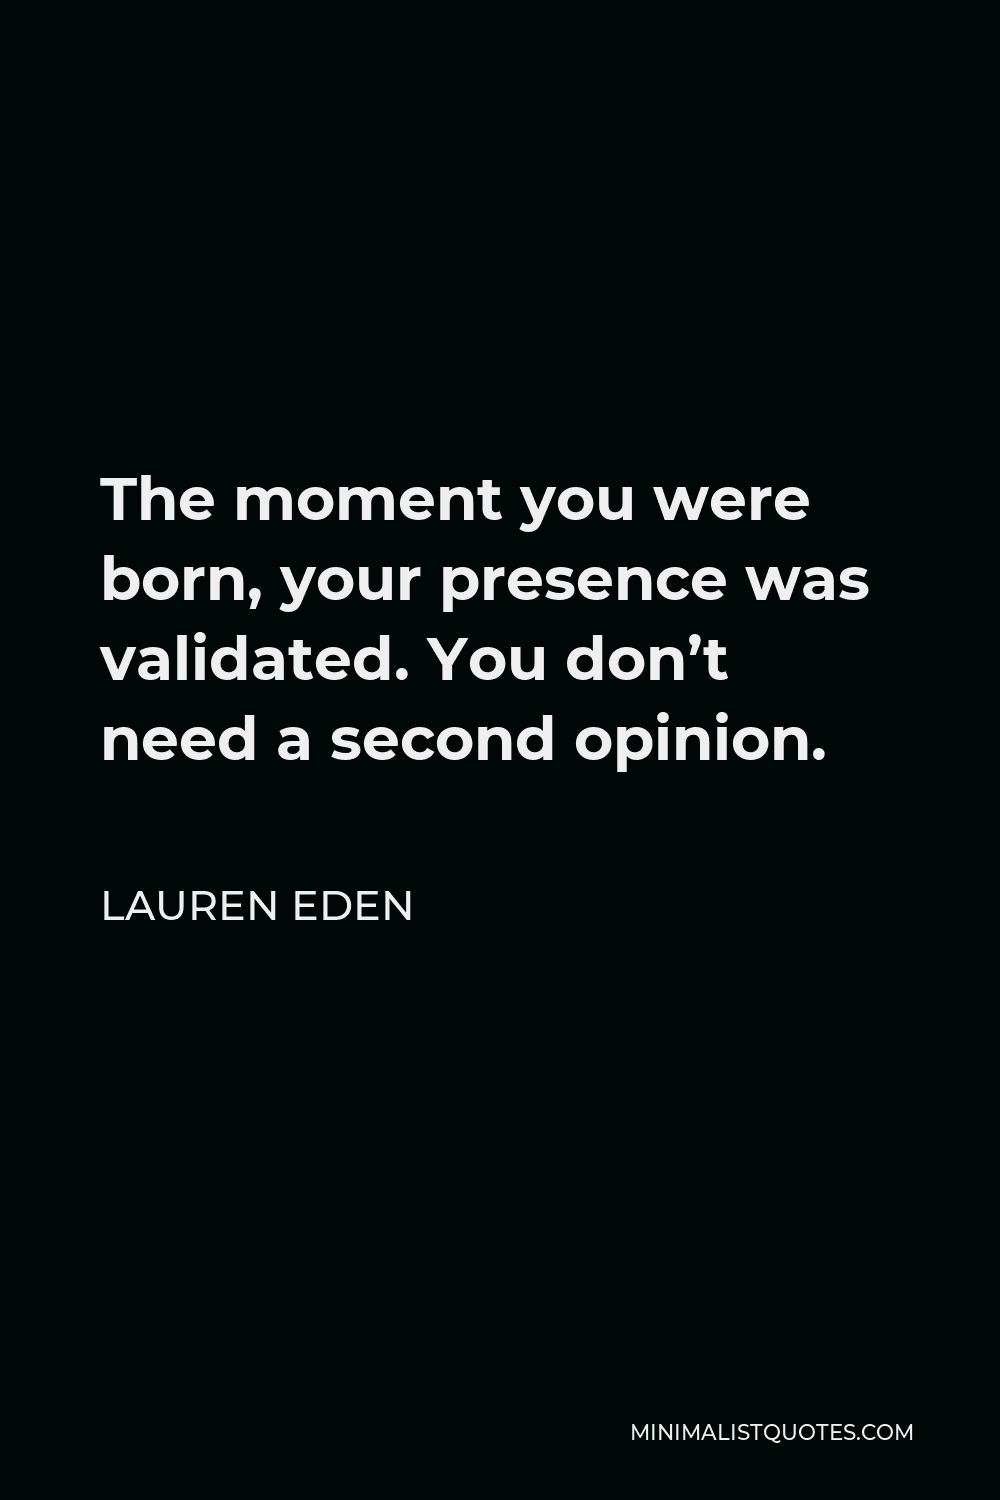 Lauren Eden Quote - The moment you were born, your presence was validated. You don’t need a second opinion.